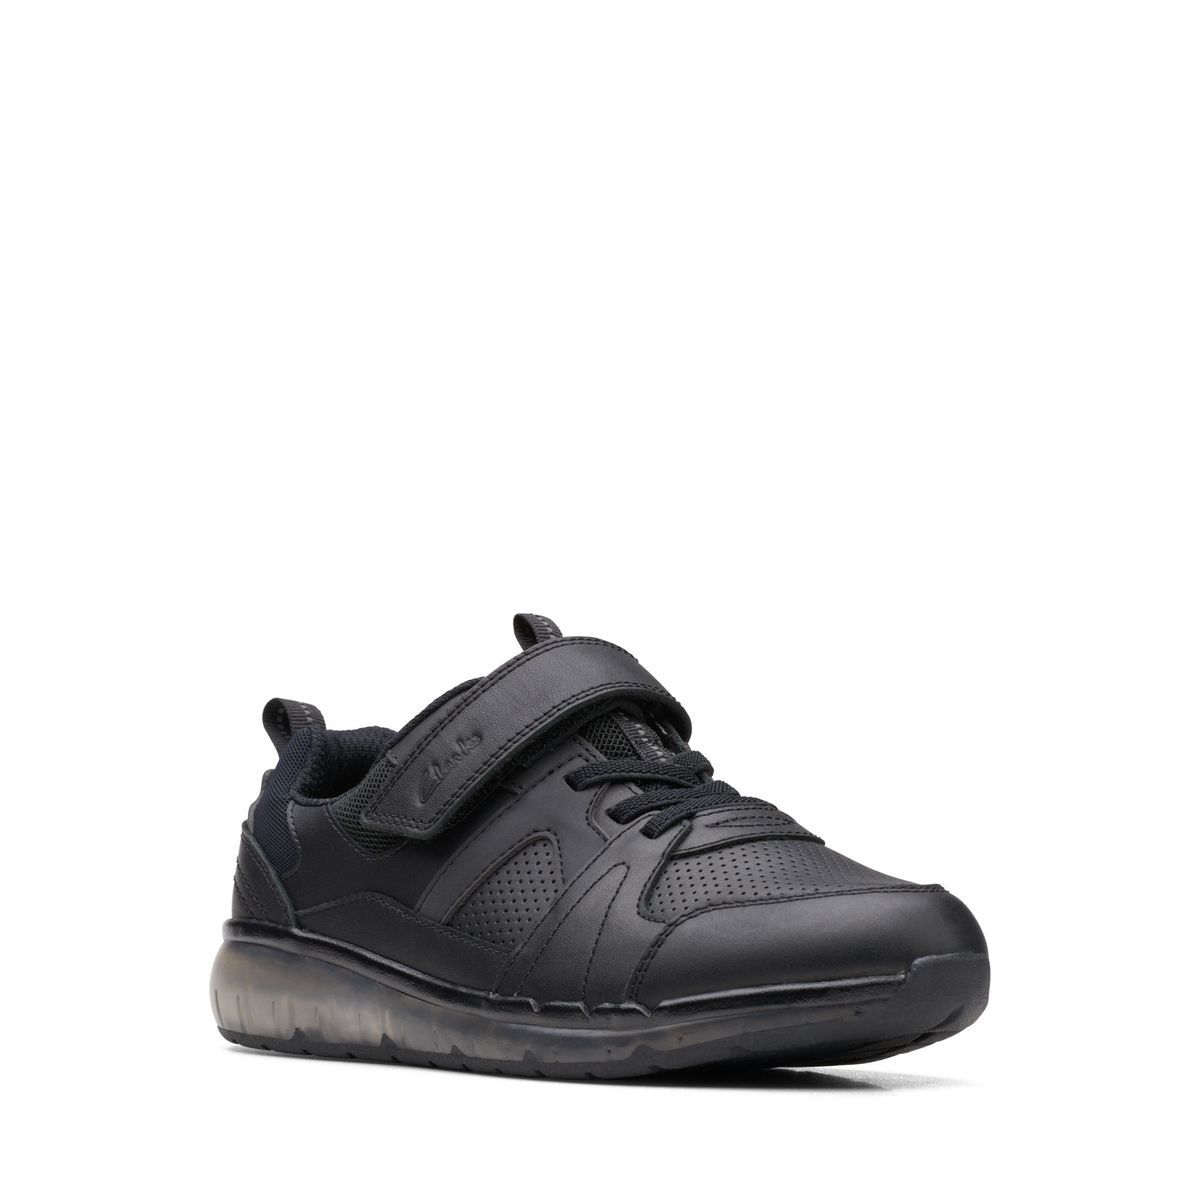 Clarks Spark Beam O Black Leather Kids Boys Trainers 679186F In Size 3 In Plain Black Leather F Width Fitting Regular Fit For kids